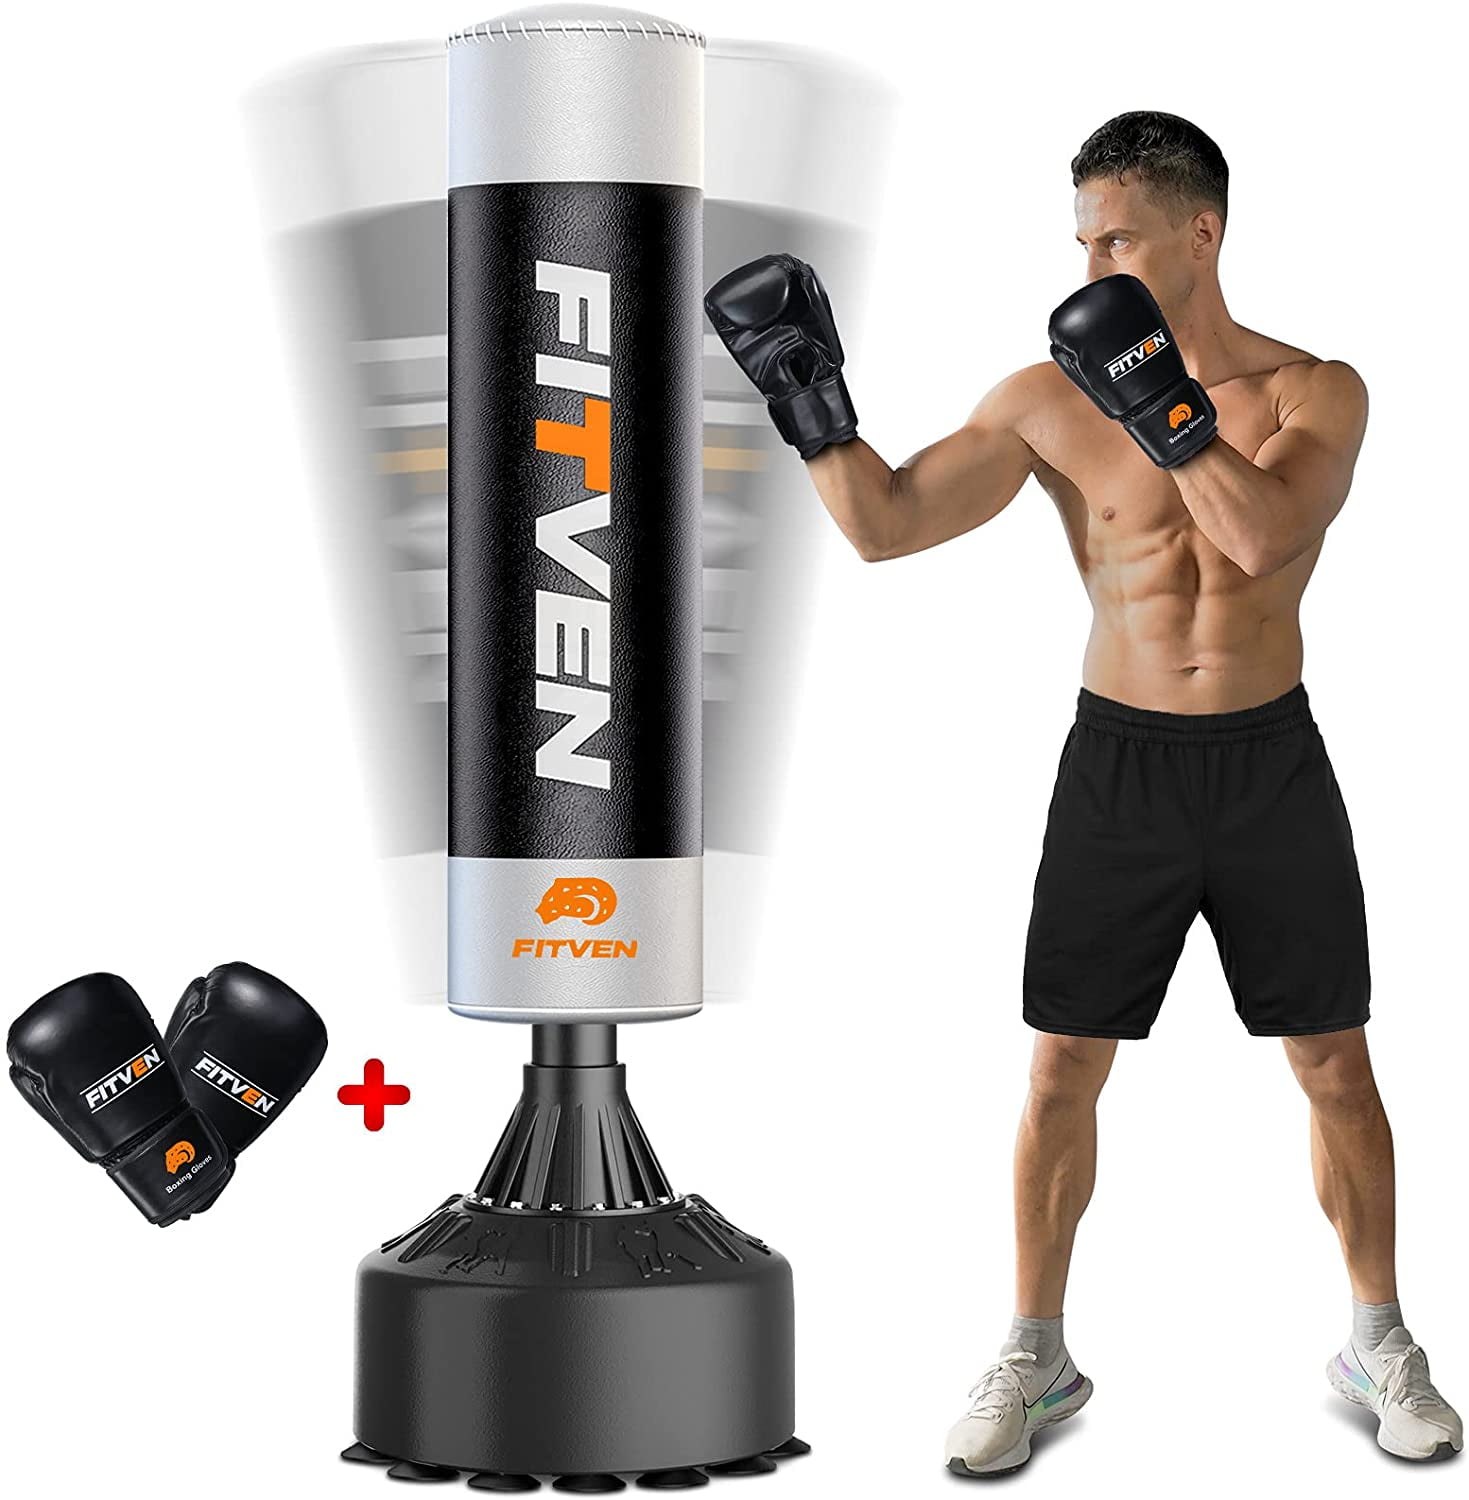 Women Exercise Martial Arts Boxing Punching Bag Set Gloves Wraps Accessories Gym 